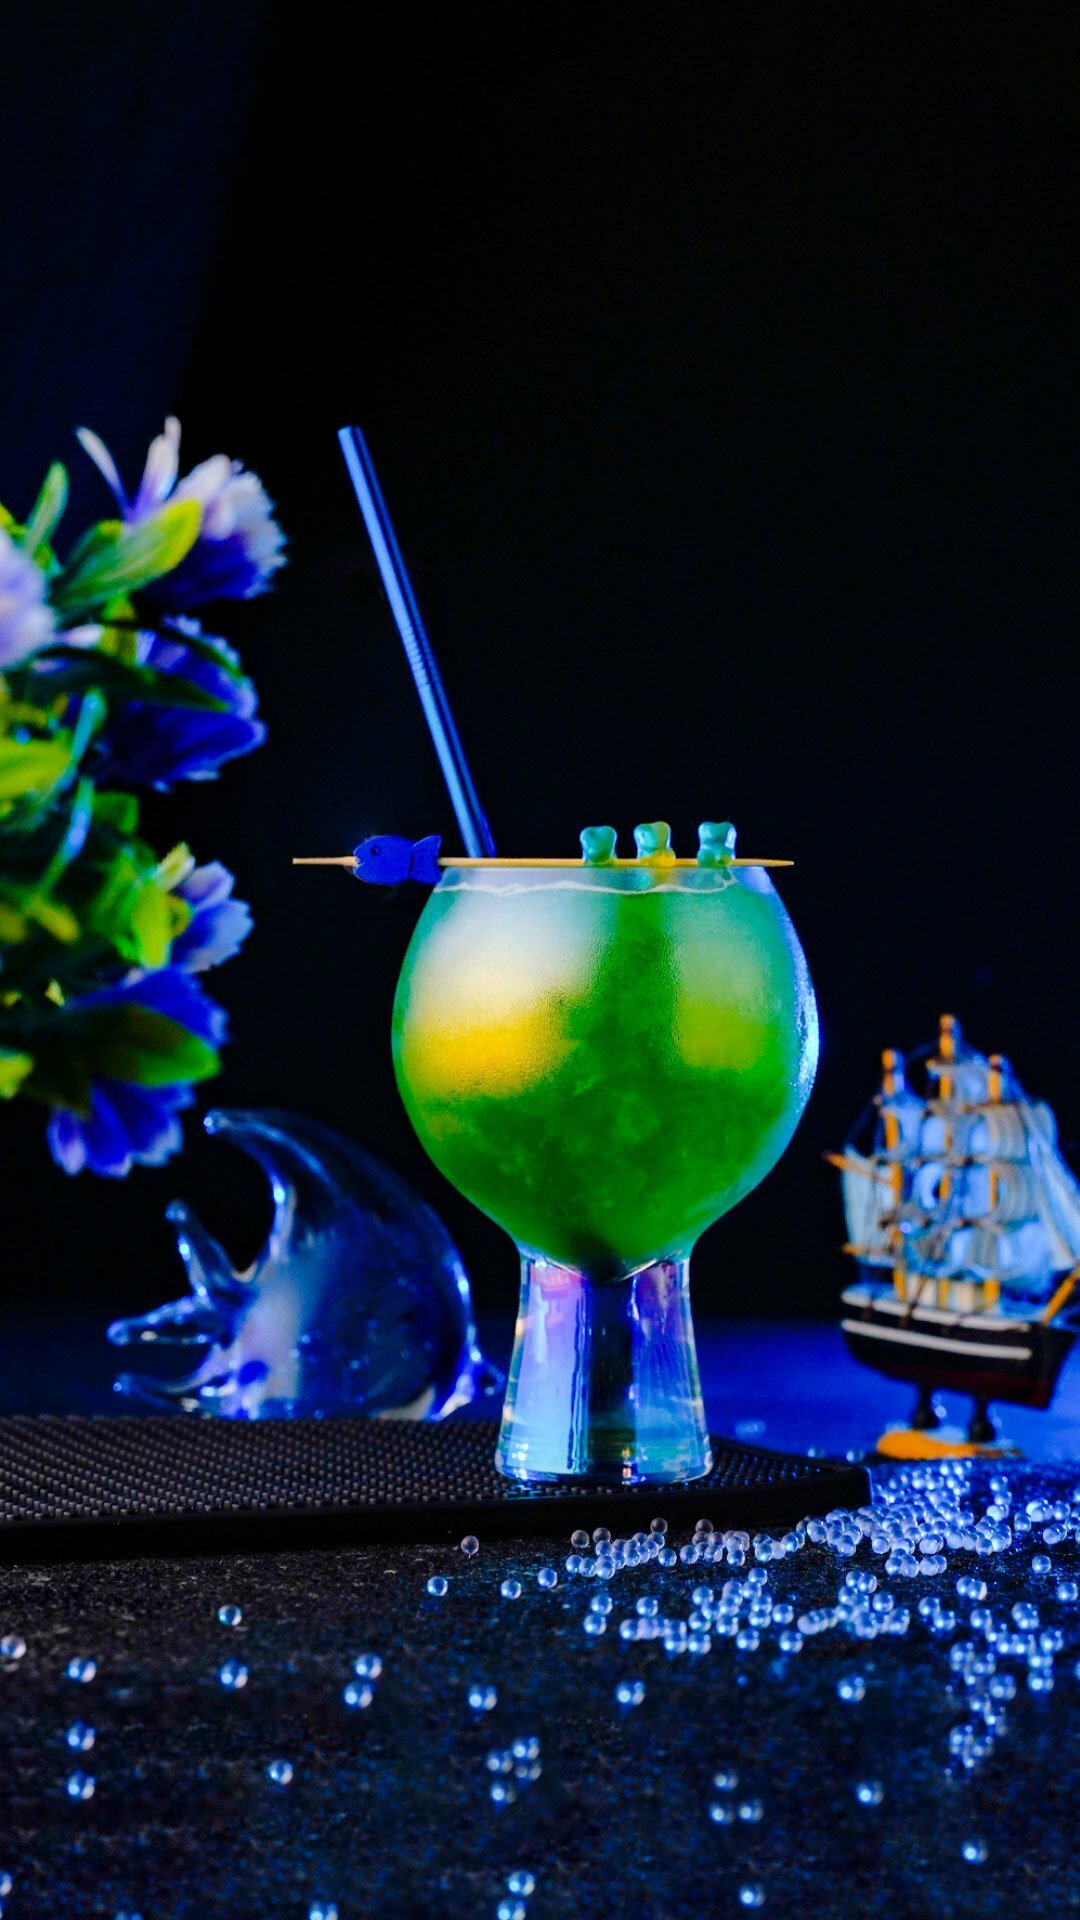 Green looking cocktail inside an exquisite glass around a blue lighted background